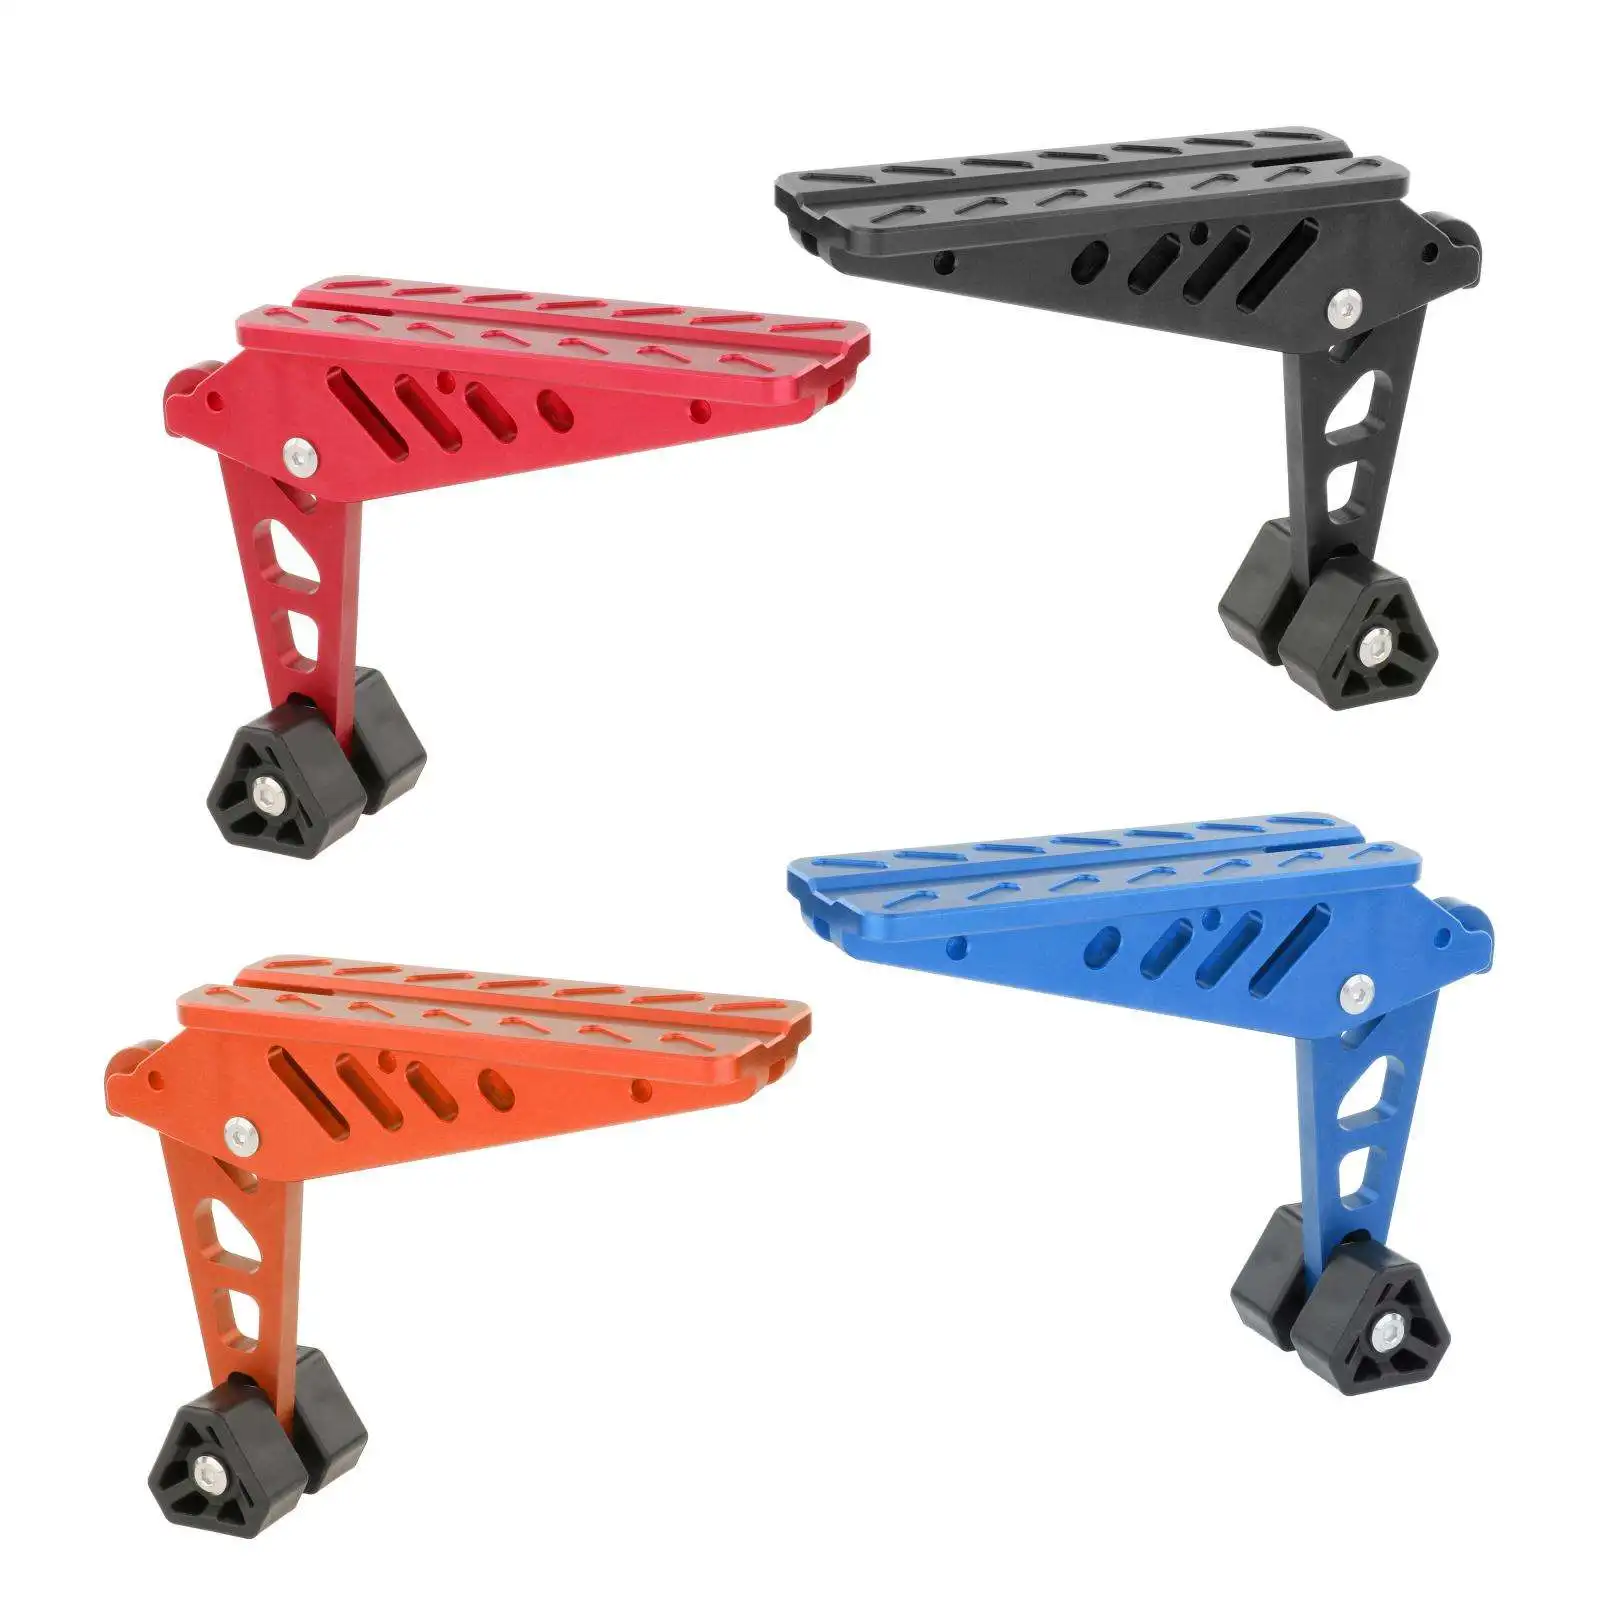 Car Door Step Exterior Unil Foldable Standing Pedal Pedal Ladder Fit for SUV Roof Rack Hiking